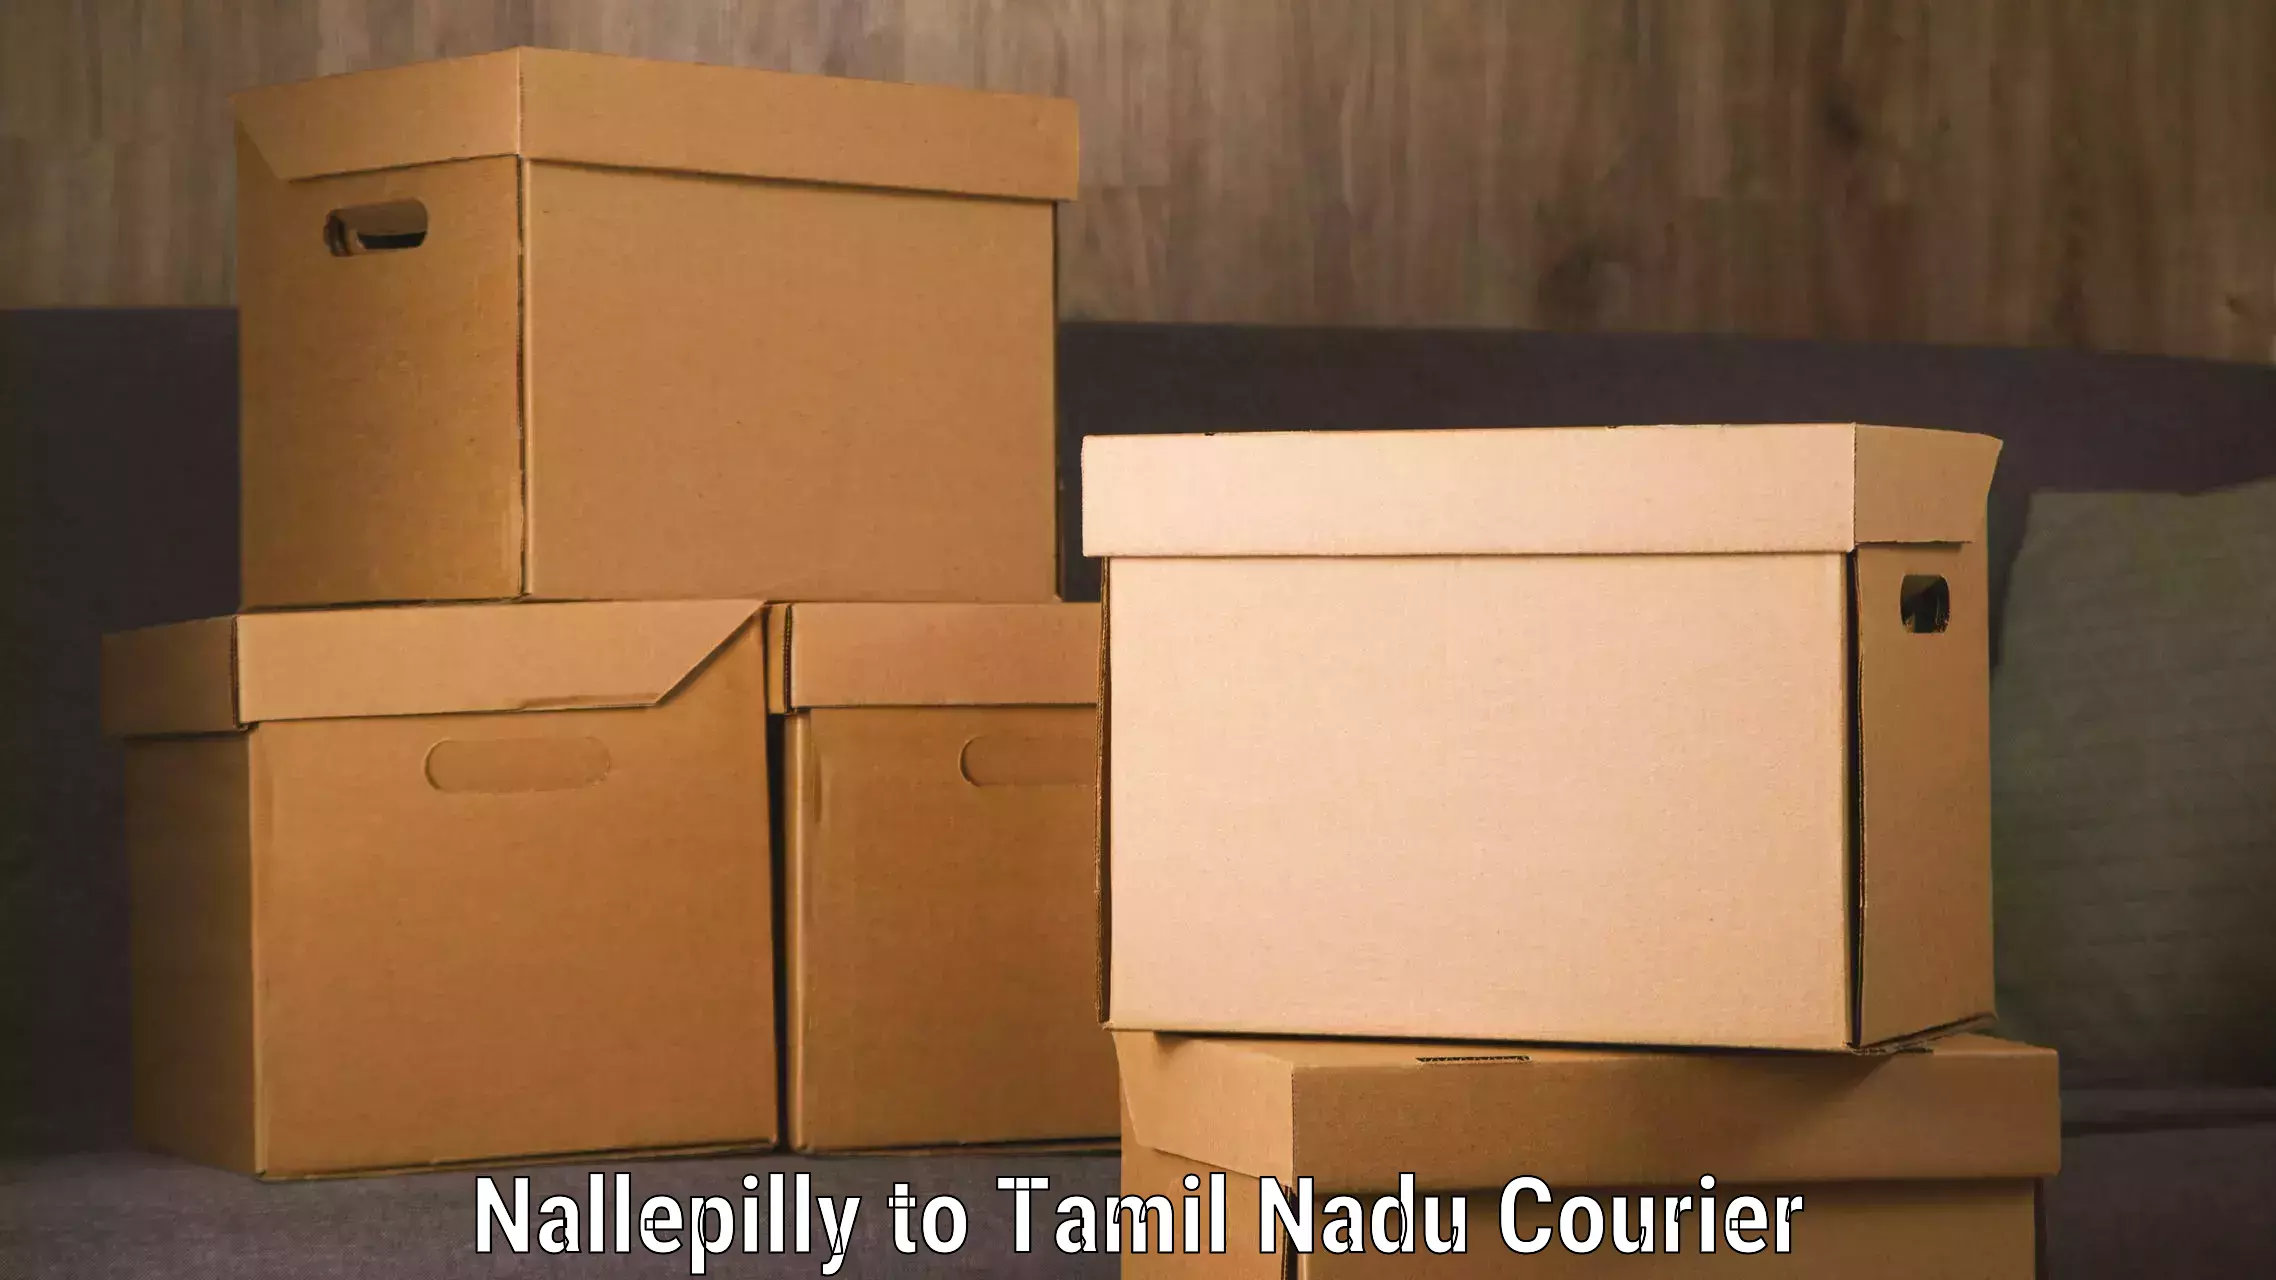 Courier service comparison Nallepilly to Arasaradi